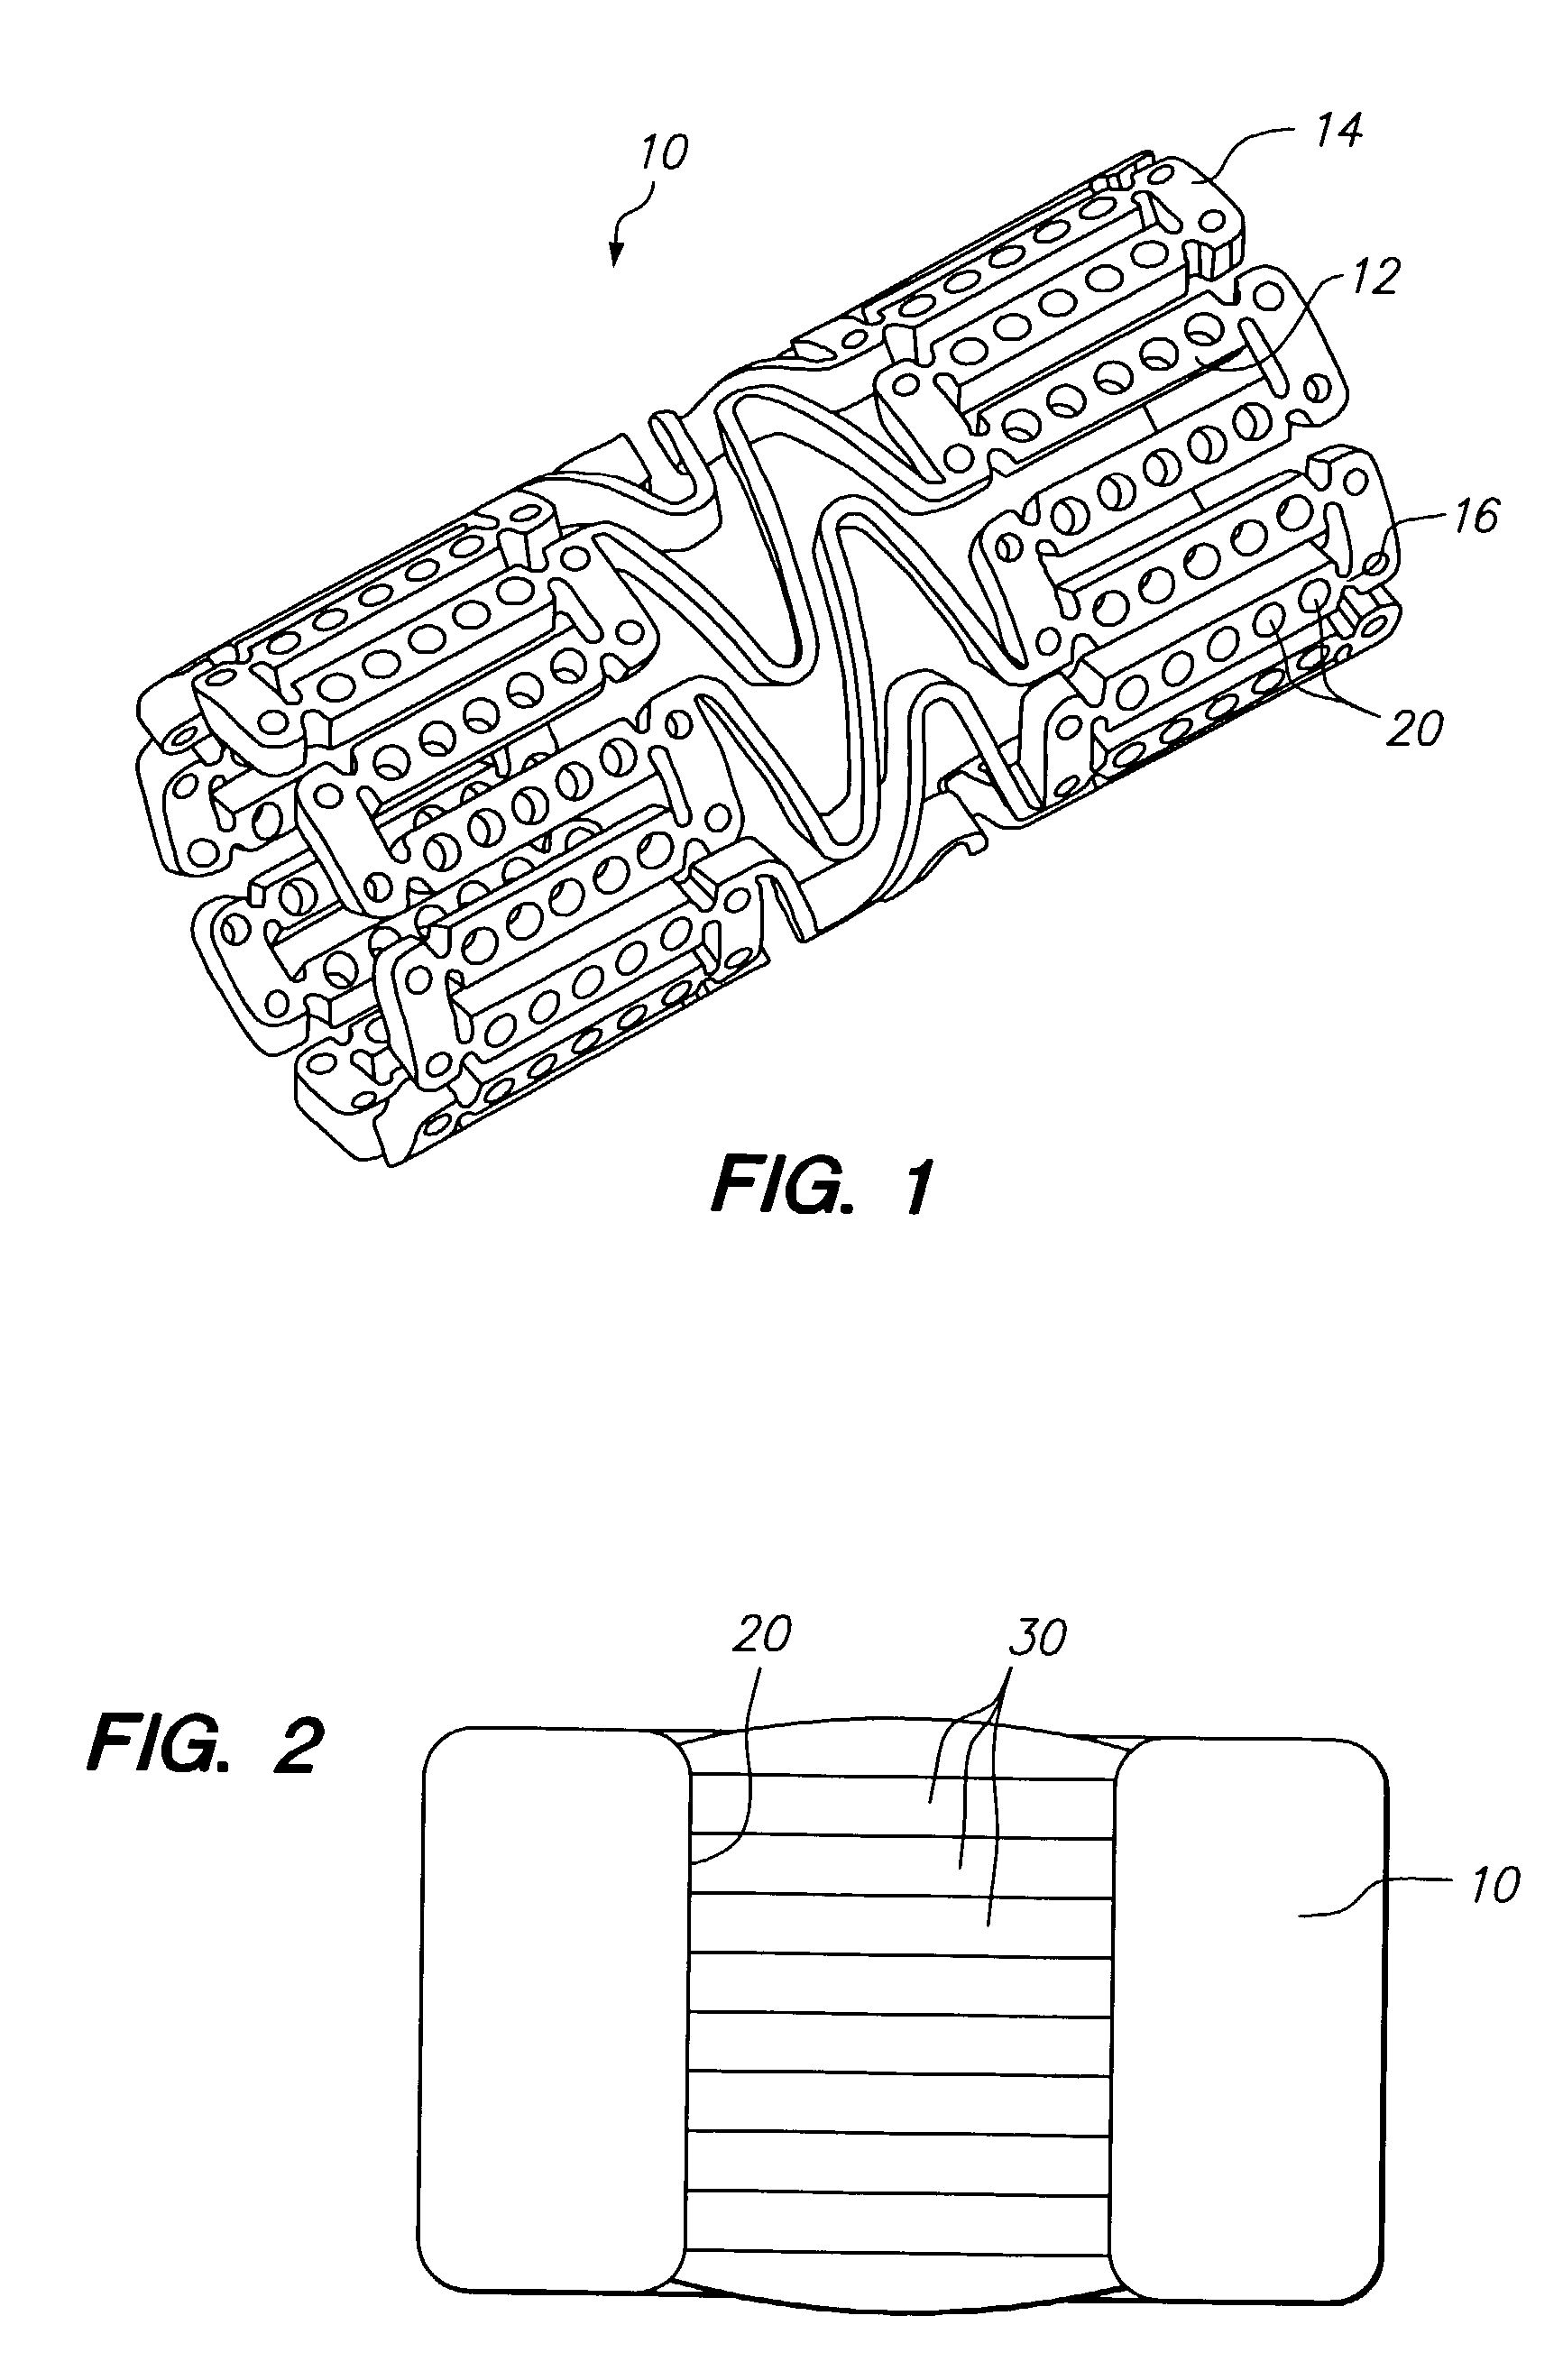 Implantable medical device with drug filled holes